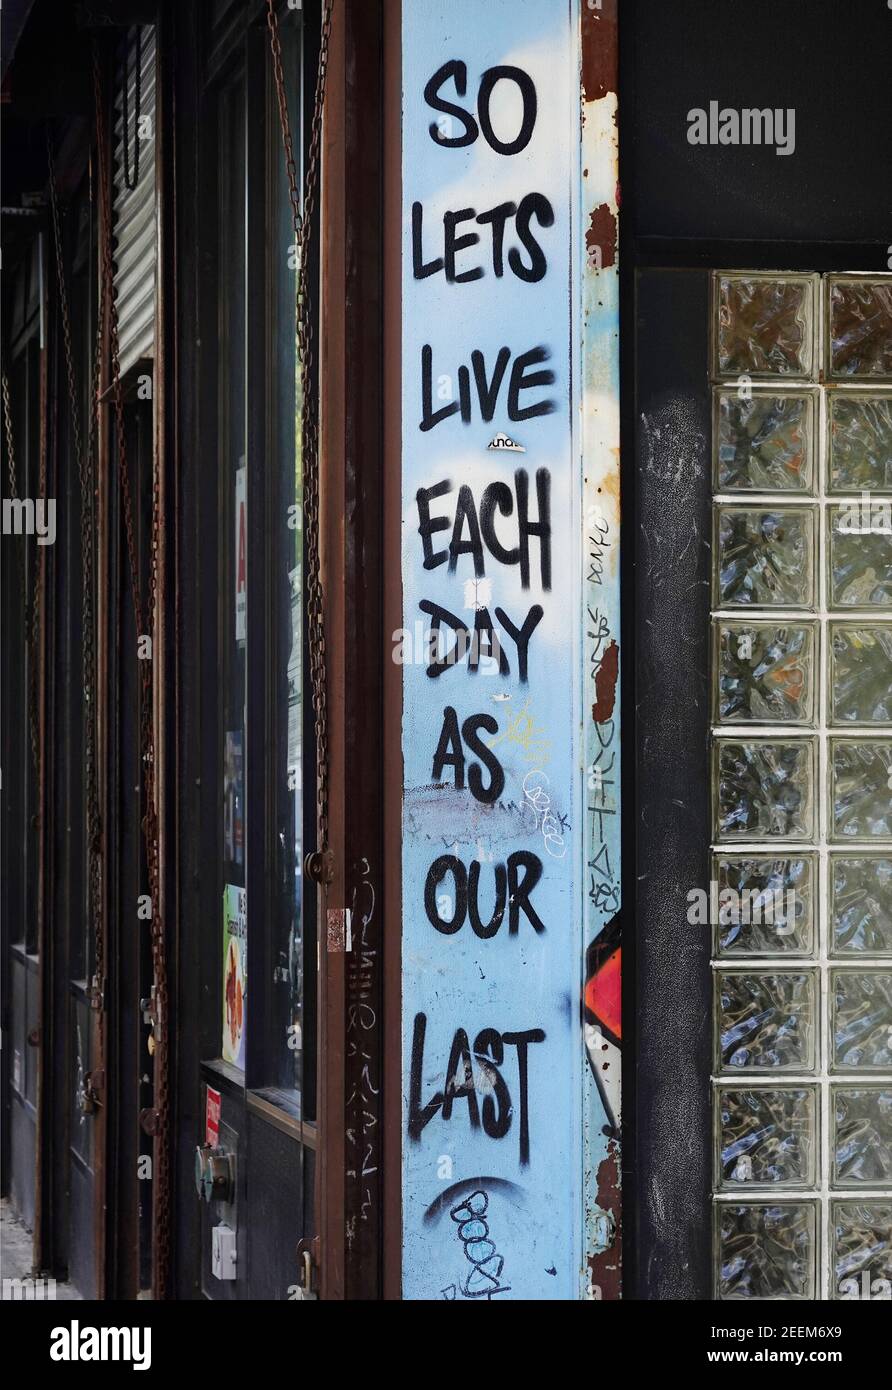 so lets live each day as our last saying on wall of shop in Brooklyn NYC Stock Photo